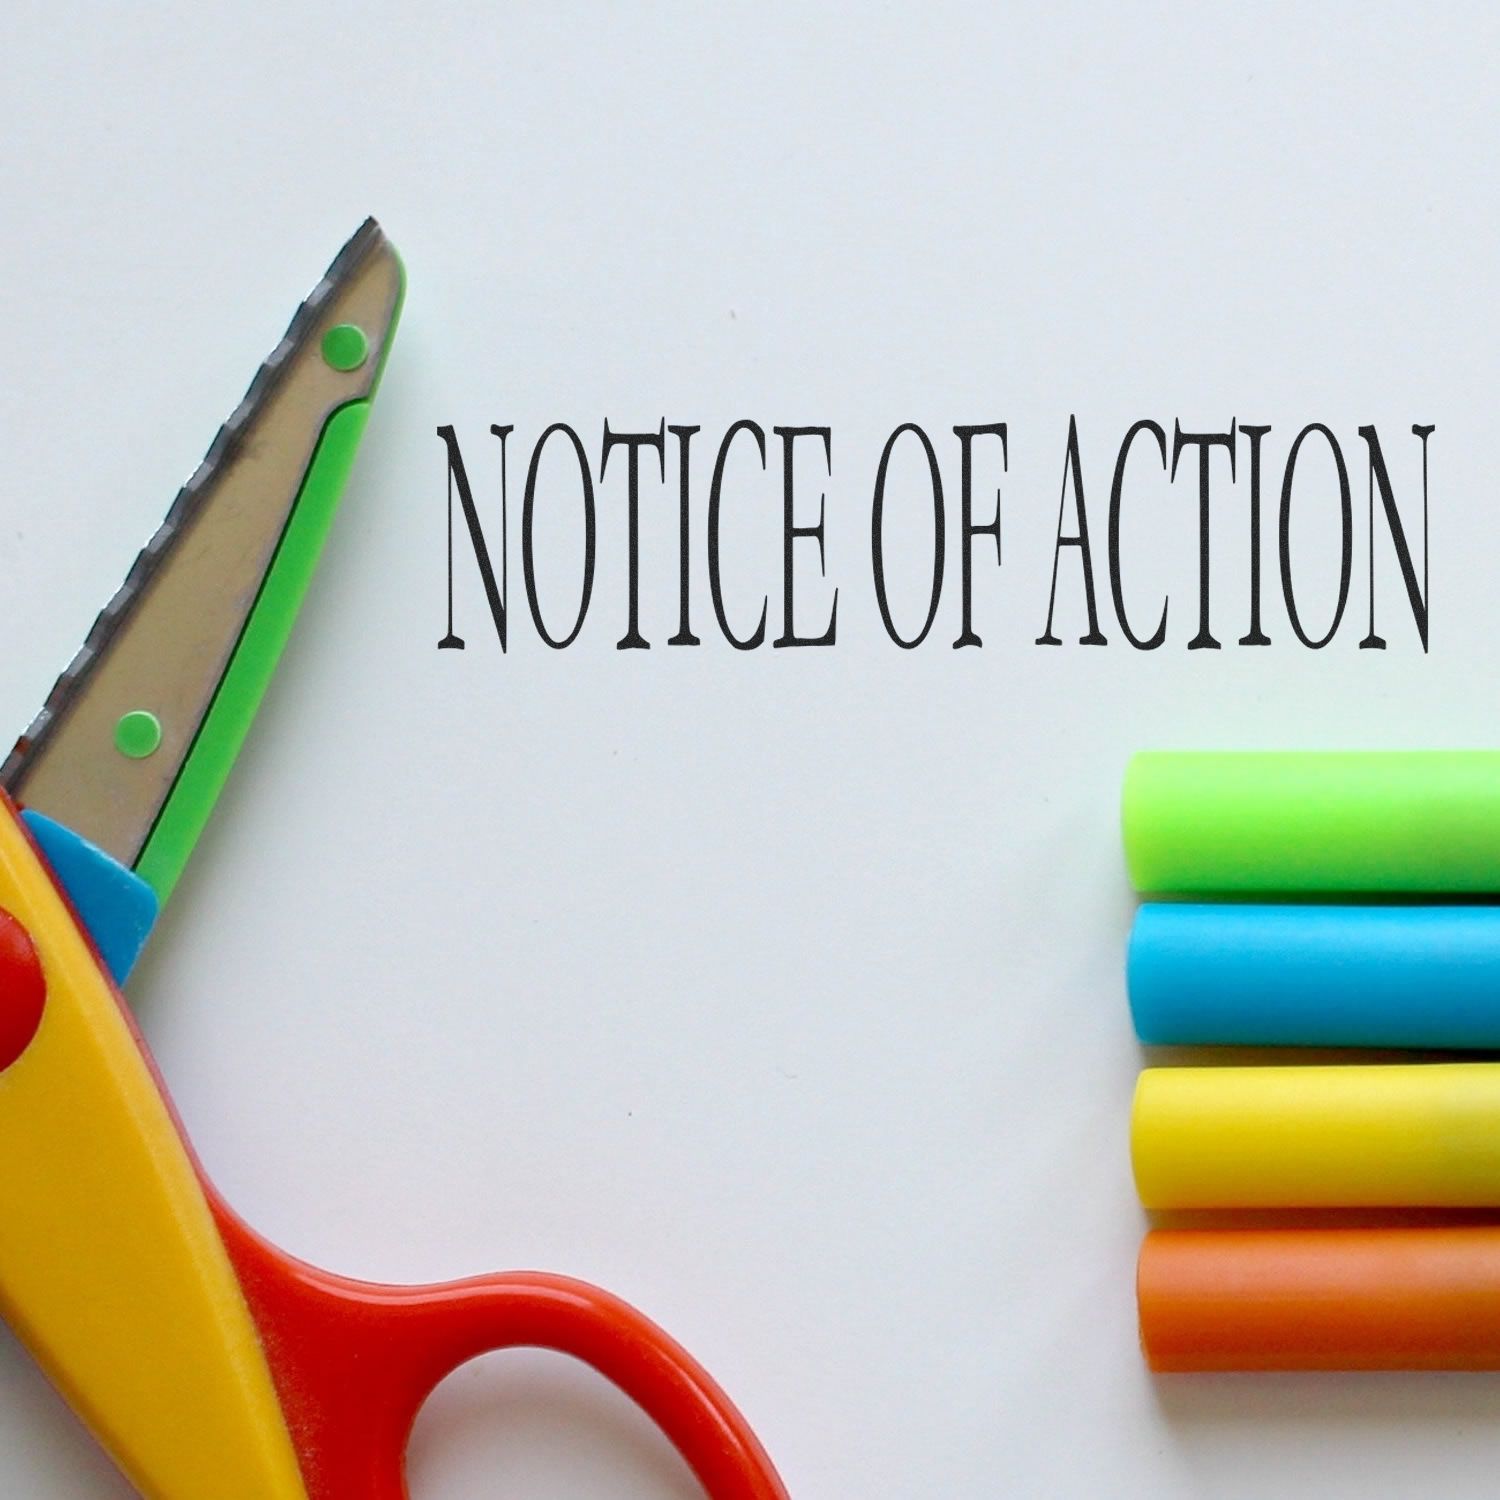 Notice Of Action Rubber Stamp Lifestyle Photo